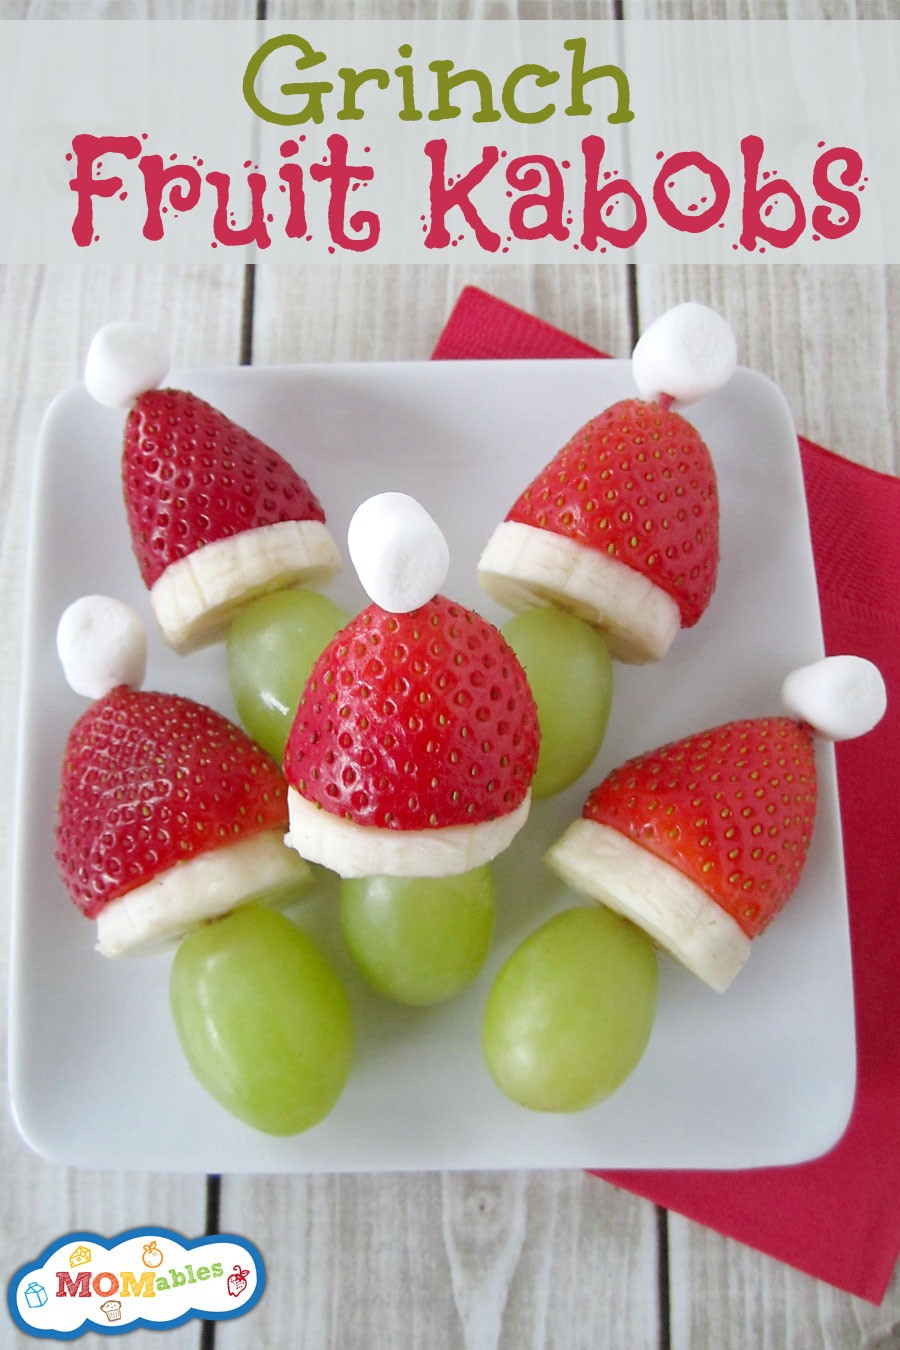 Holiday Party Snack Ideas
 7 Fun & Healthy Food Ideas for the School Party